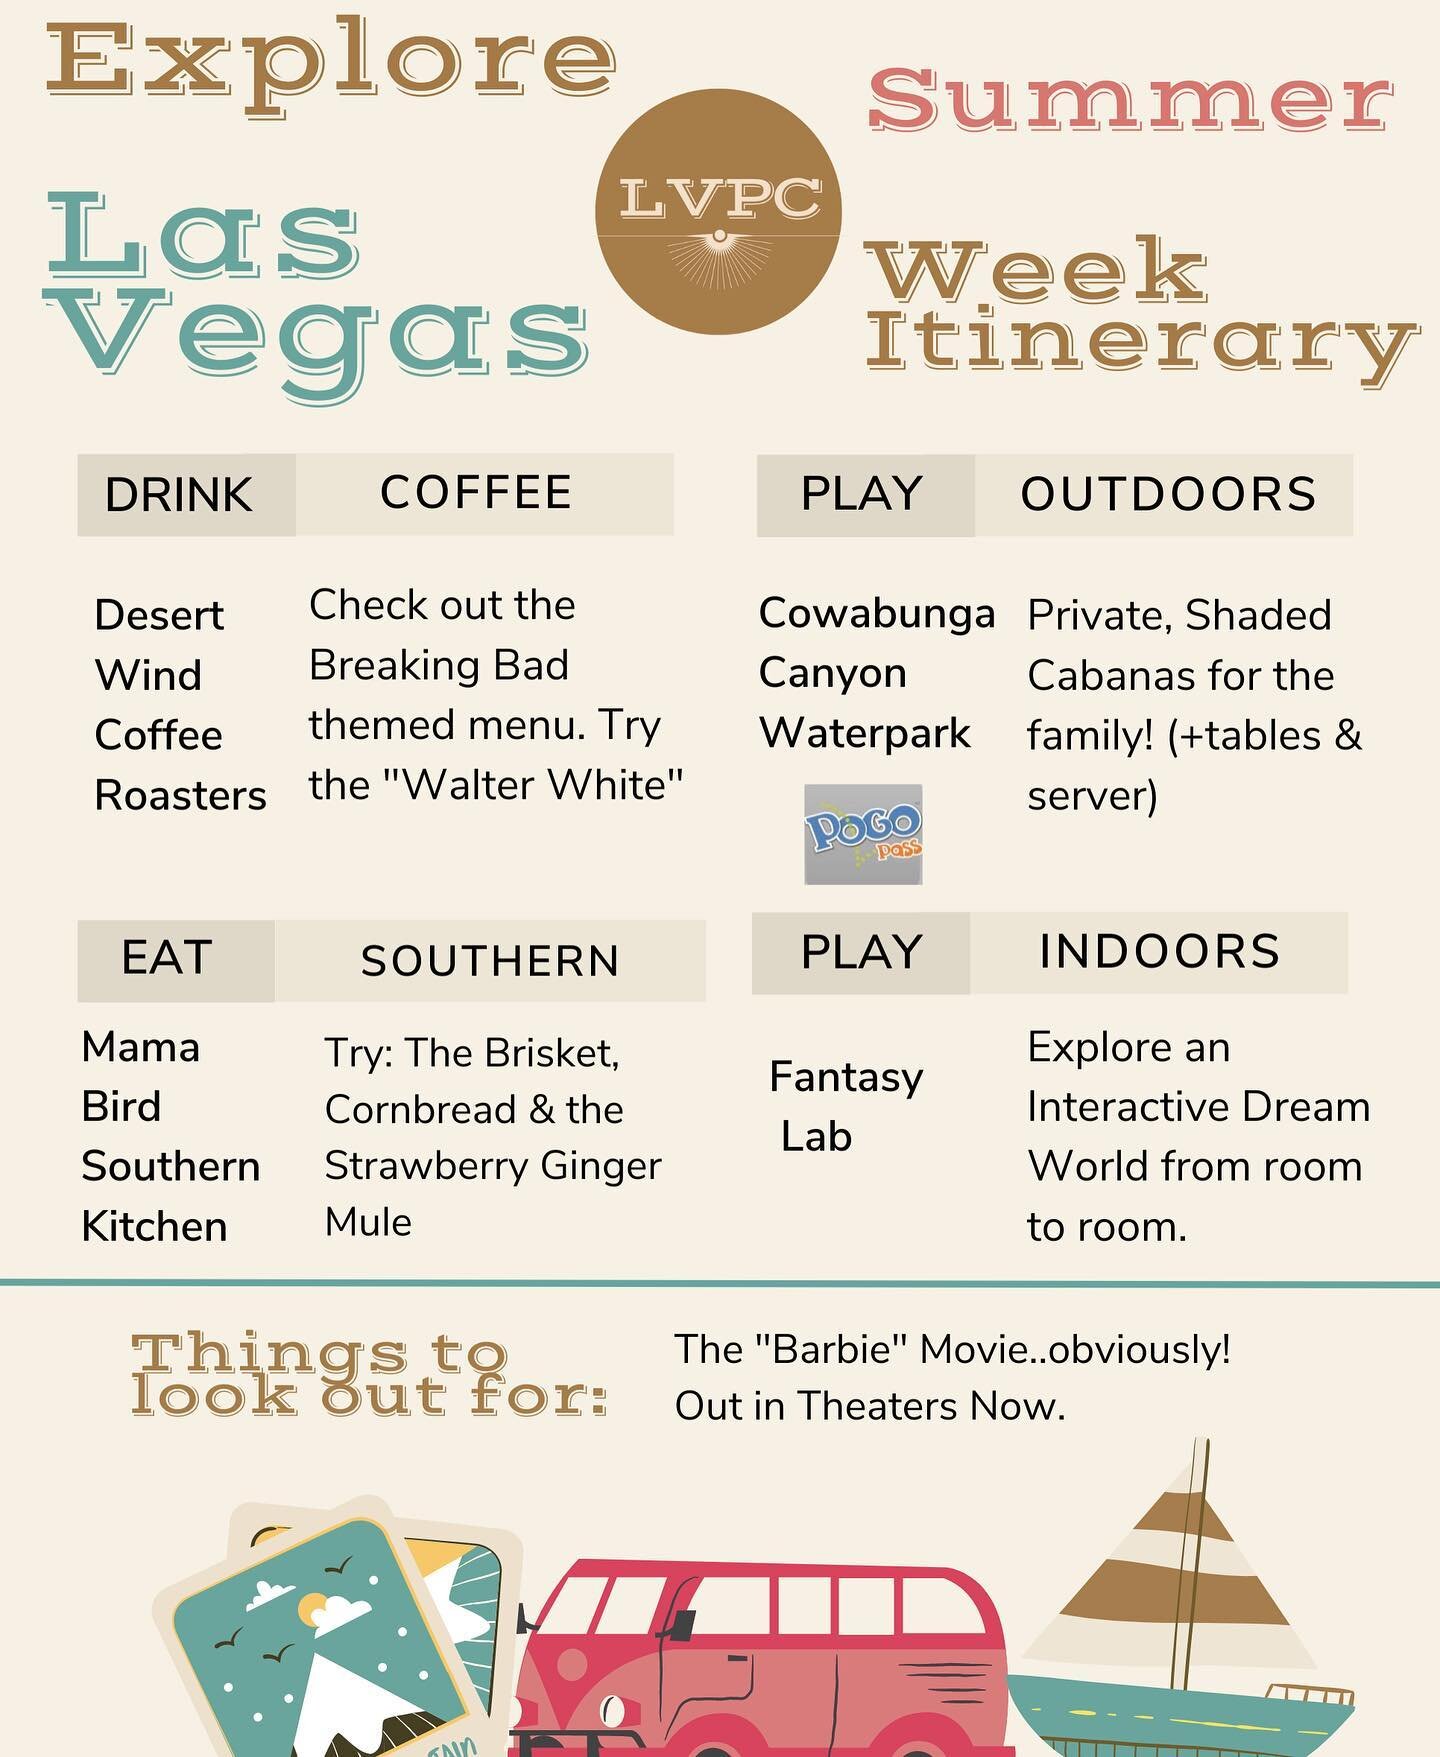 STAY // EXPLORE LAS VEGAS

These are suggested activities from places we love in Las Vegas. This particular itinerary is focused on Summer Fun...great for locals or the tourist who wants something different to do this time around!

☕️DRINK/COFFEE Des